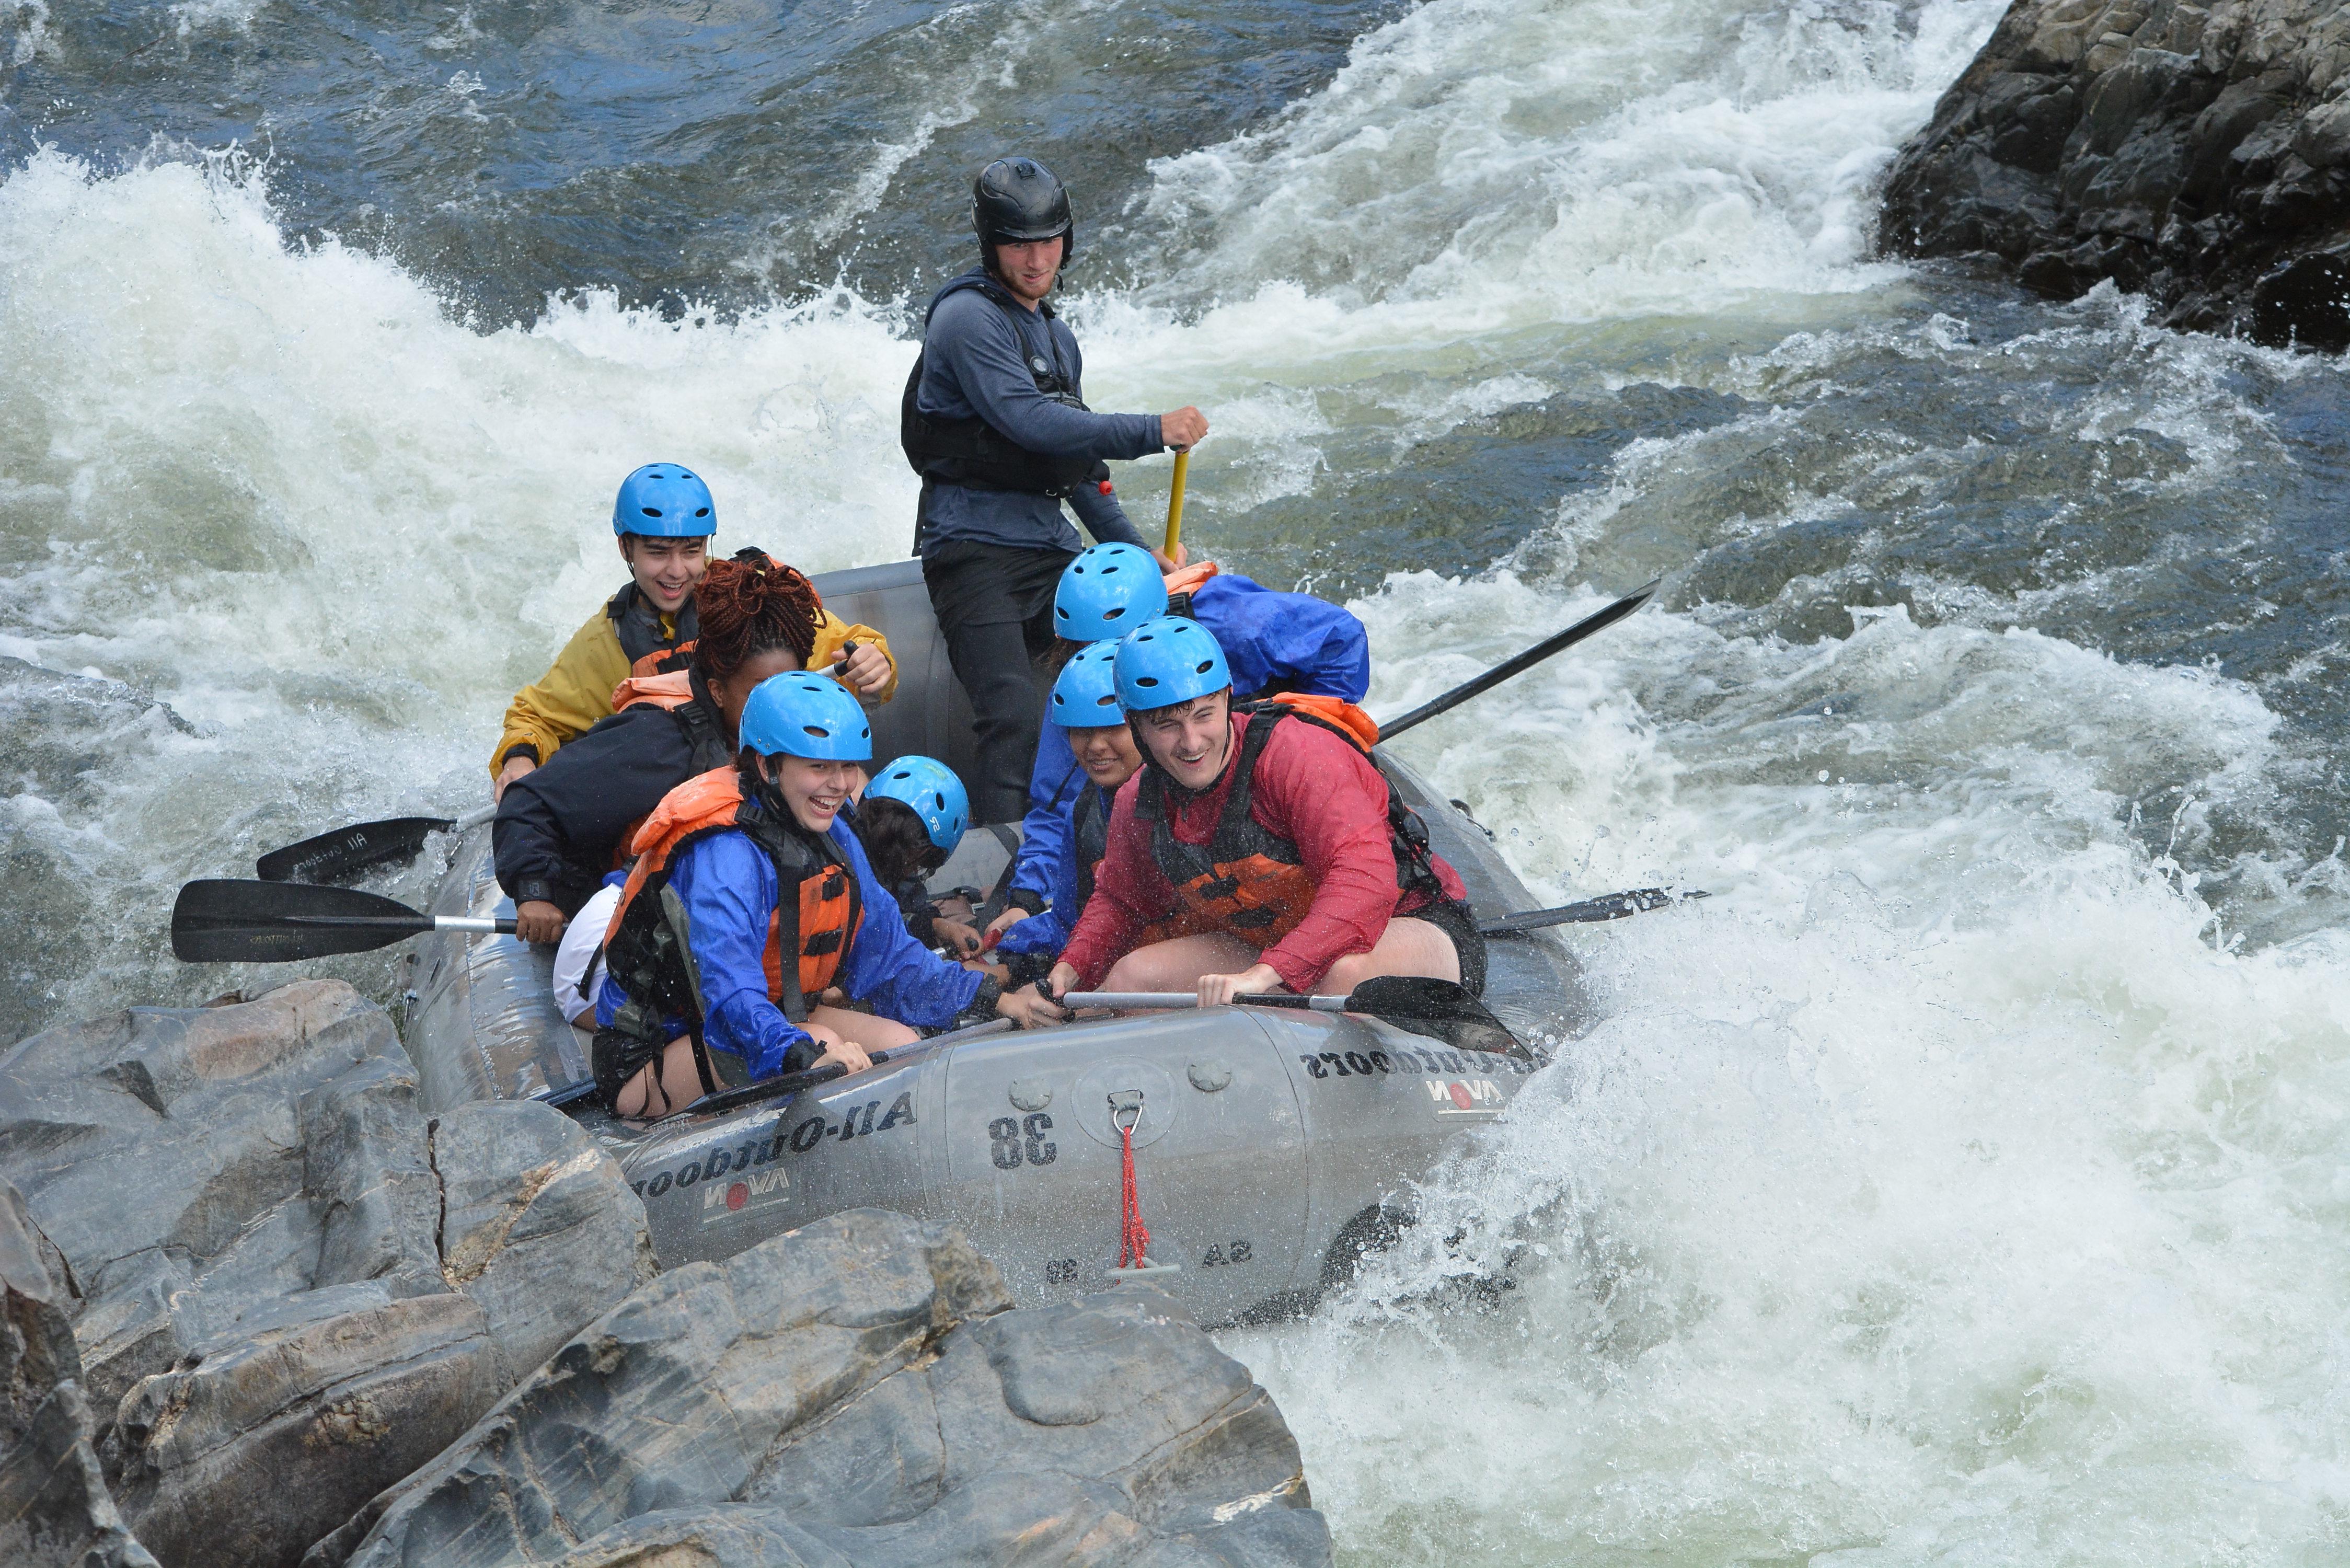 Students in rafting boat going down a rapid